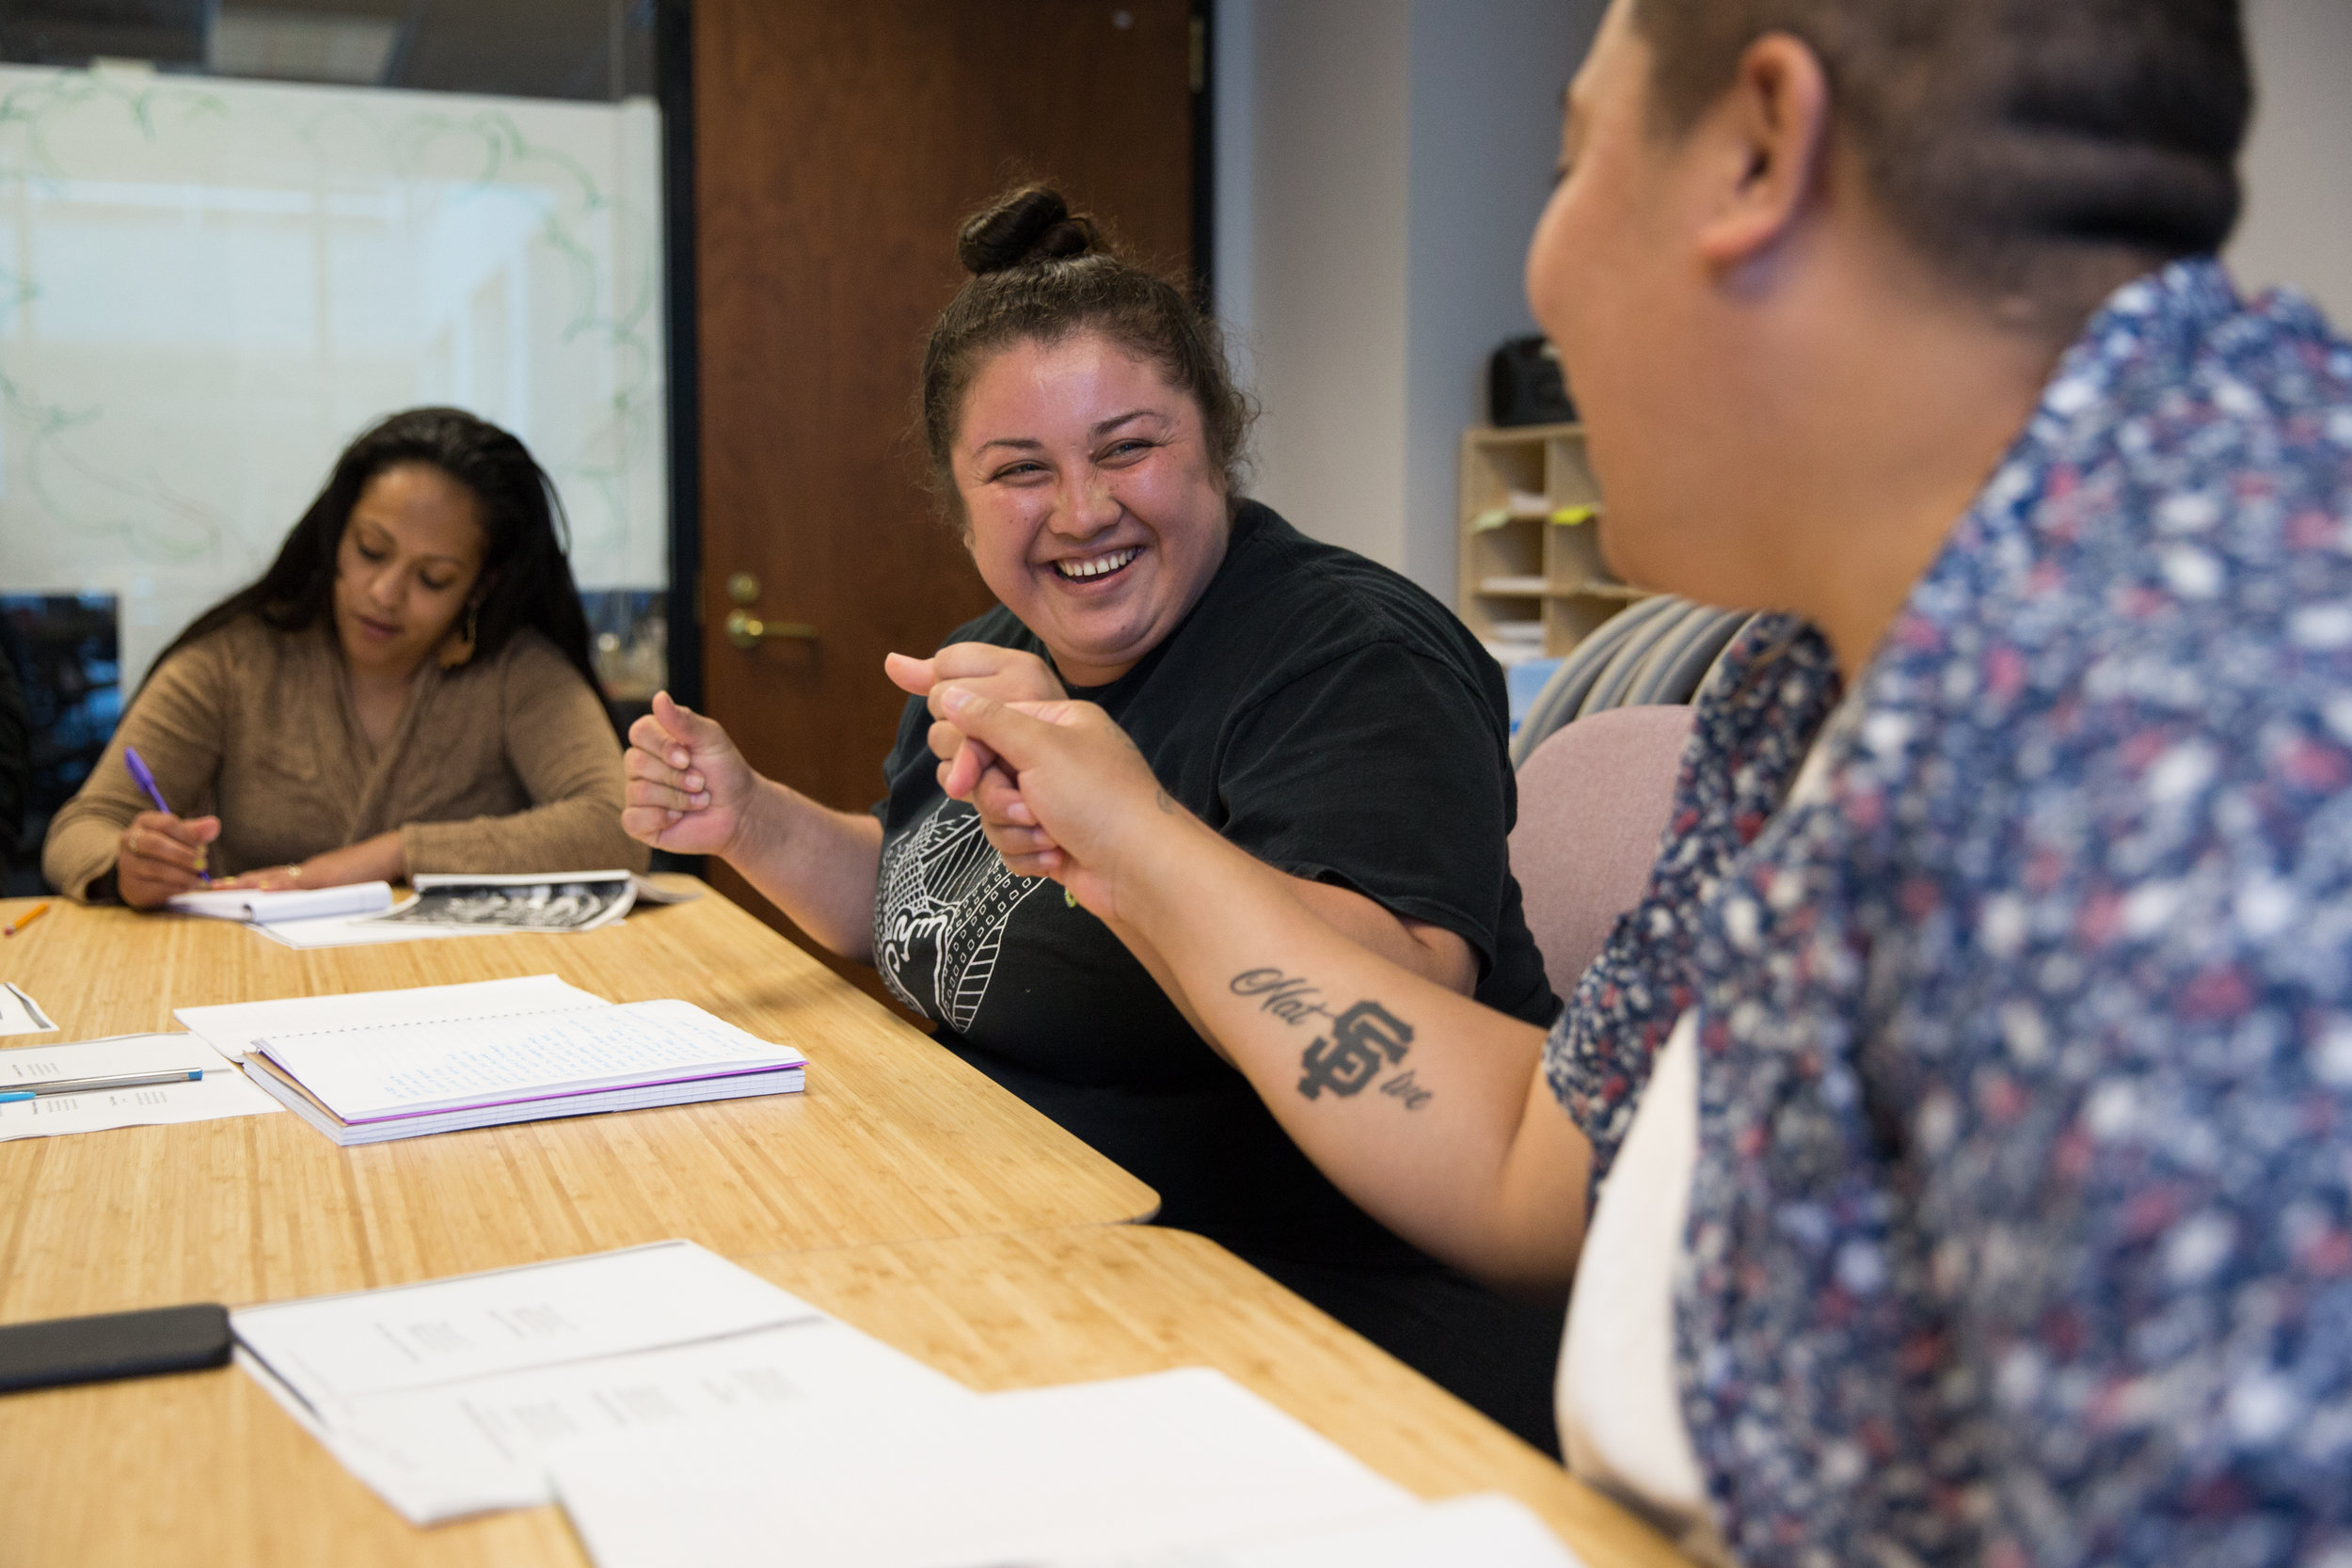  Lucero Herrera, left, and K.I. Ifopo fist bump after Lucero read her poem out loud during a Writing to Power workshop. Many of the staff members knew each other before coming to the center, like Lucero and K.I. who were incarcerated together, and ha